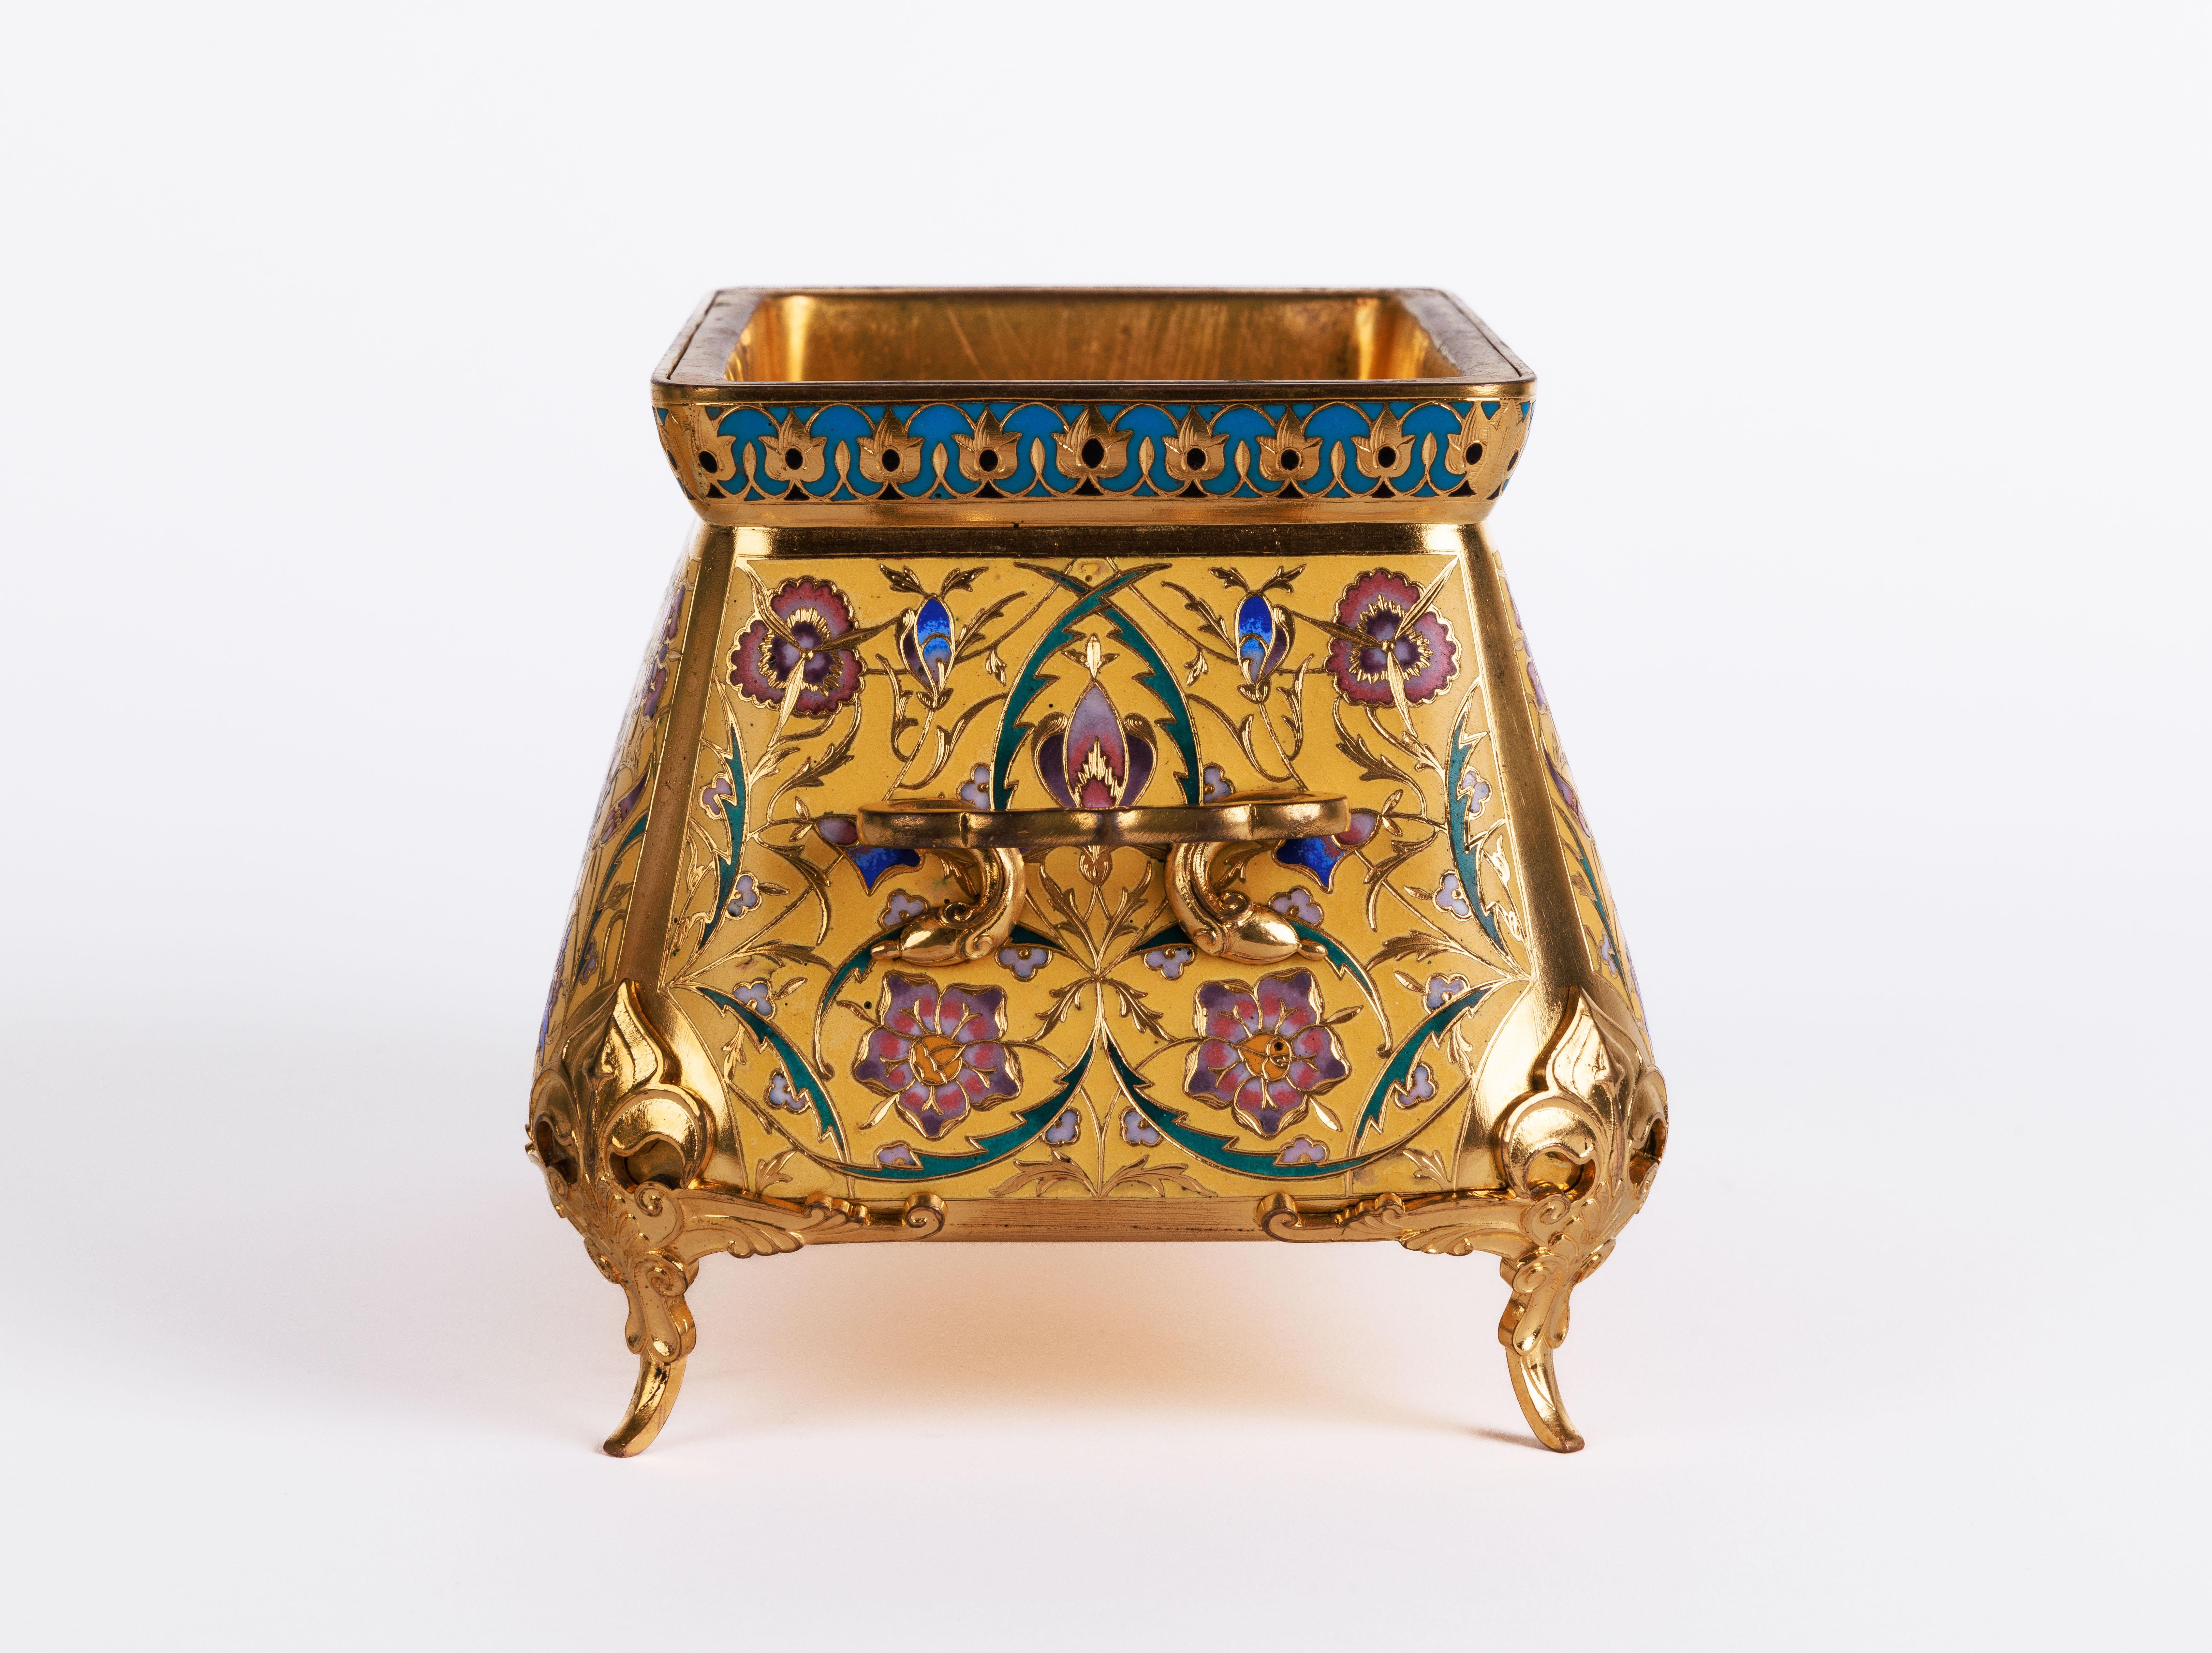 Ferdinand Barbedienne, a French Ormolu and Champleve Enamel Jardiniere, C. 1870 For Sale 4